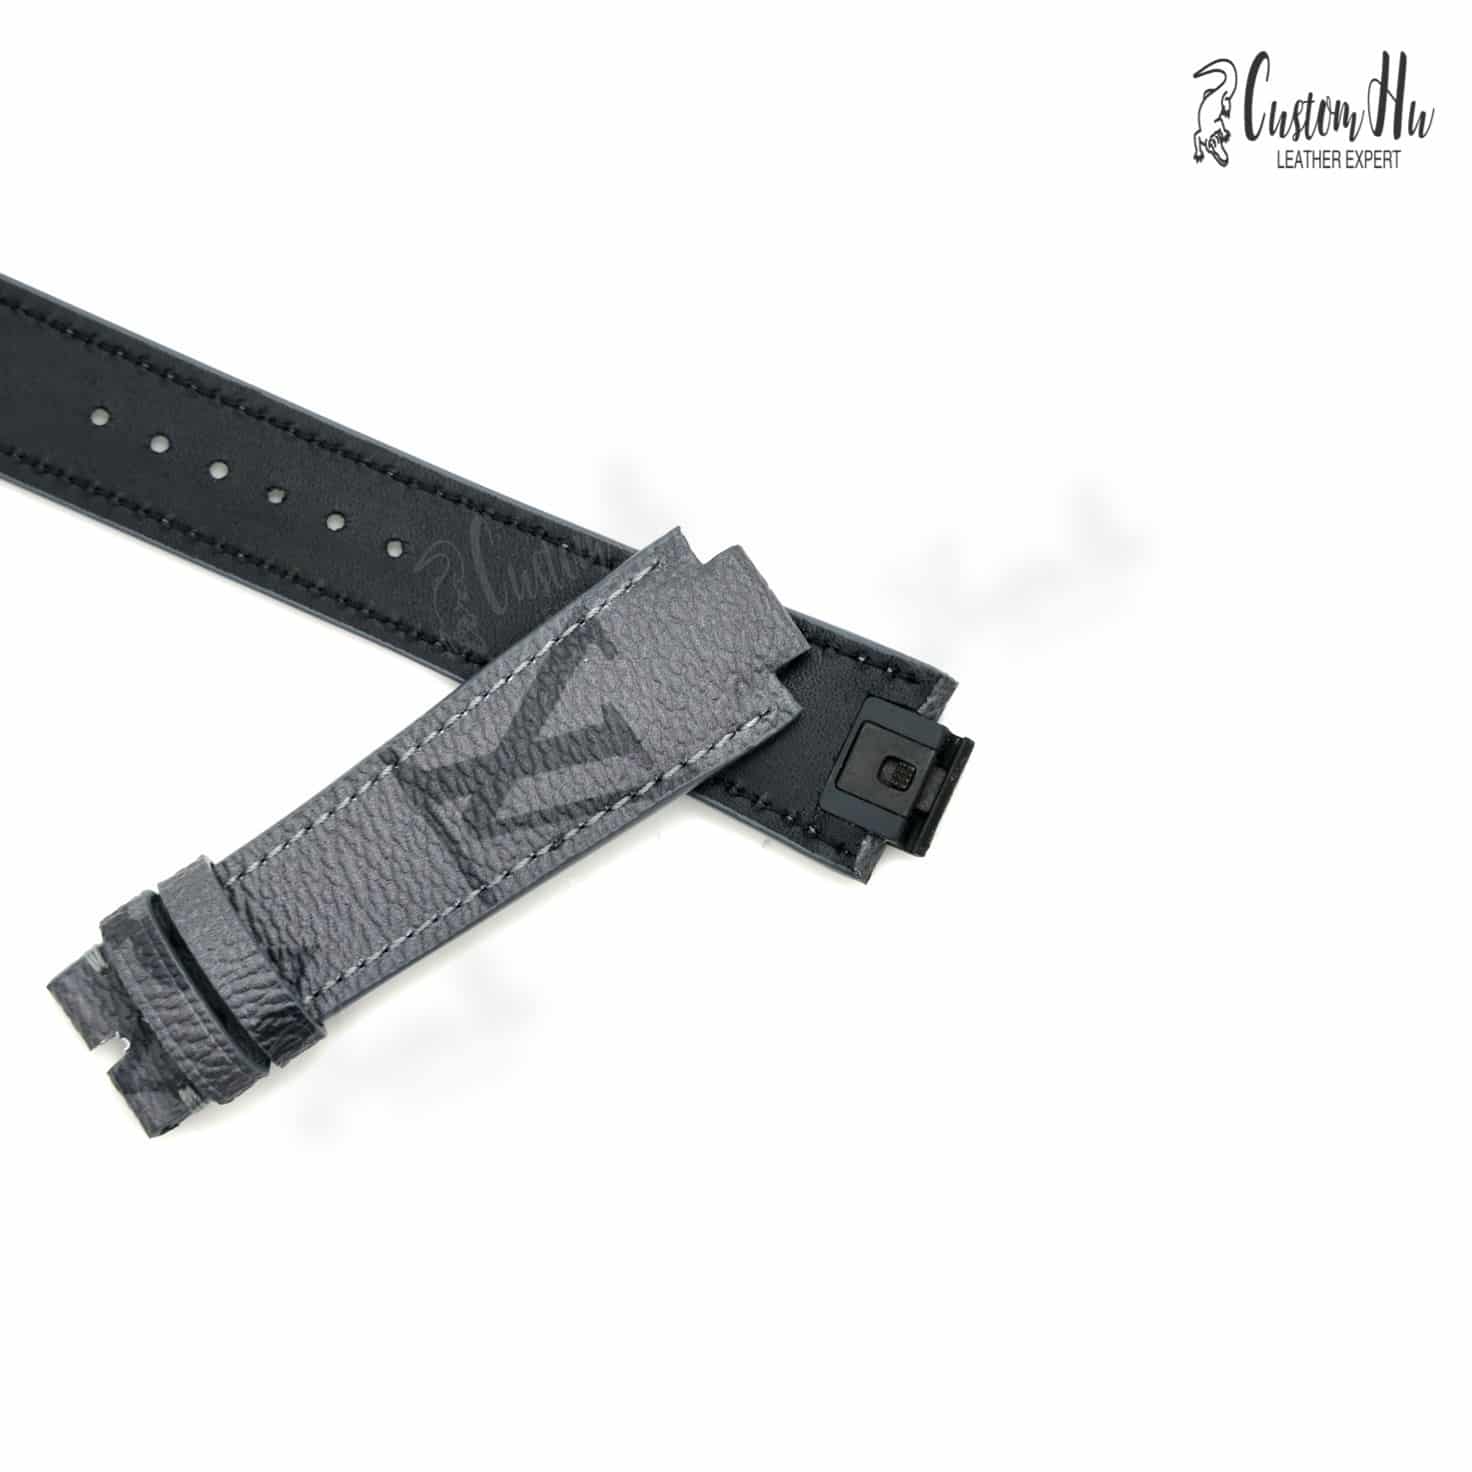 Handmade Louis Vuitton Apple Watch Band The total band length is 146mm to  190mm 5 34 to 7 12 plus the watc  Correa de reloj Apple watch  correas Reloj apple